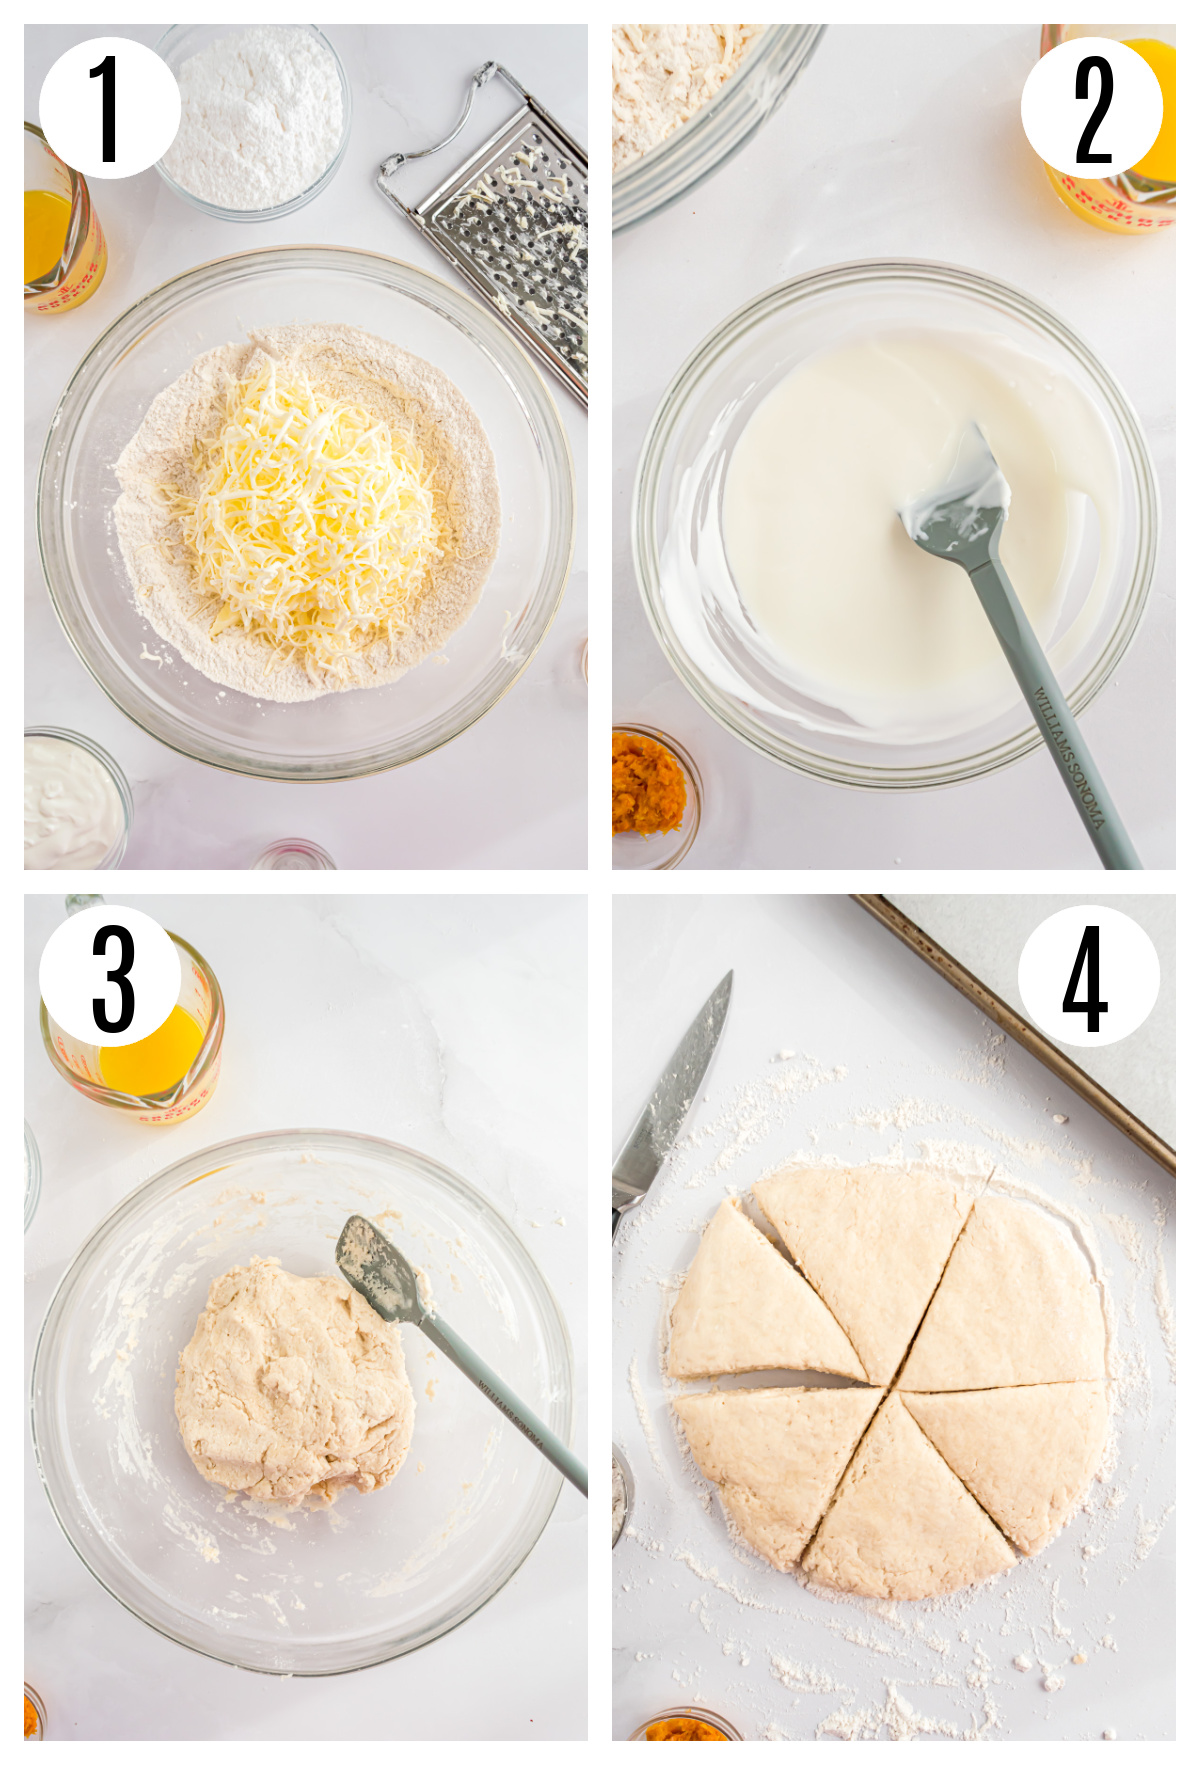 The first steps in making the glazed orange scone recipe include grating the butter into the flour mixture, combining the sour cream, milk, and extract, bringing the dough together, forming the dough into a disc and cutting the triangles.